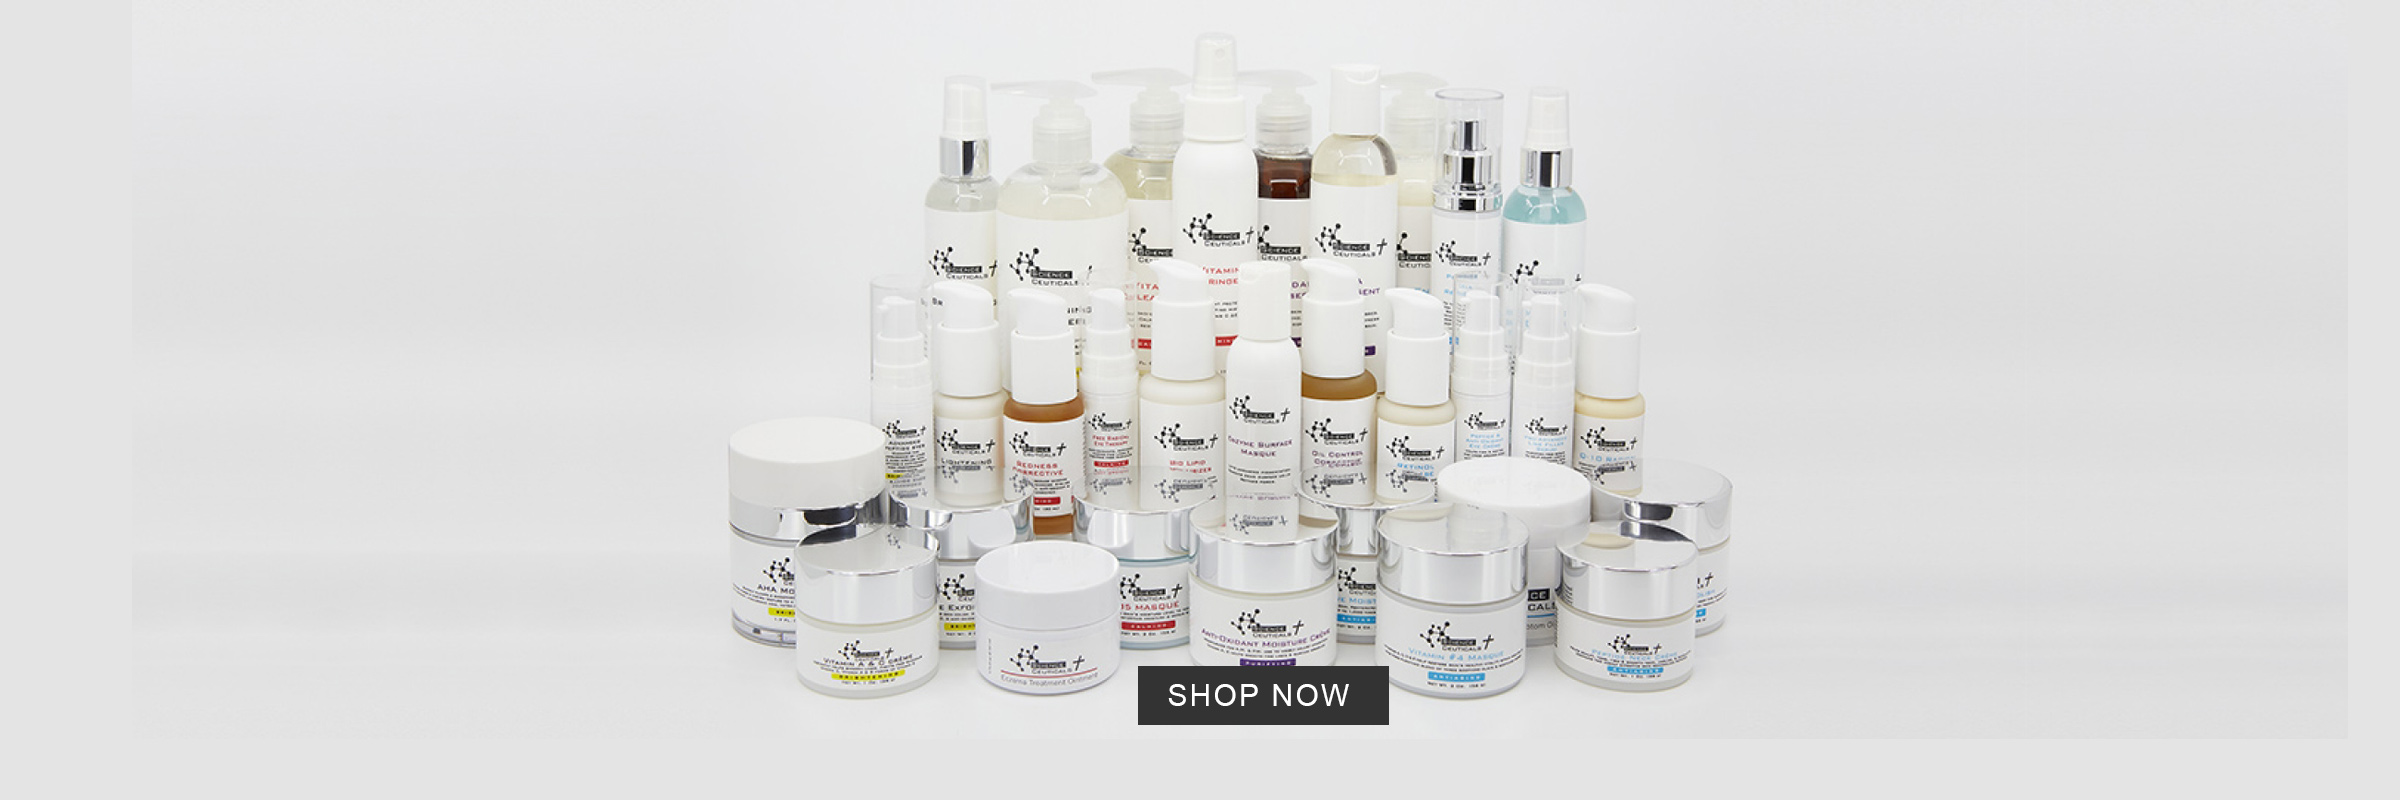 best-all-clean-natural-skin-care-system-shop-now